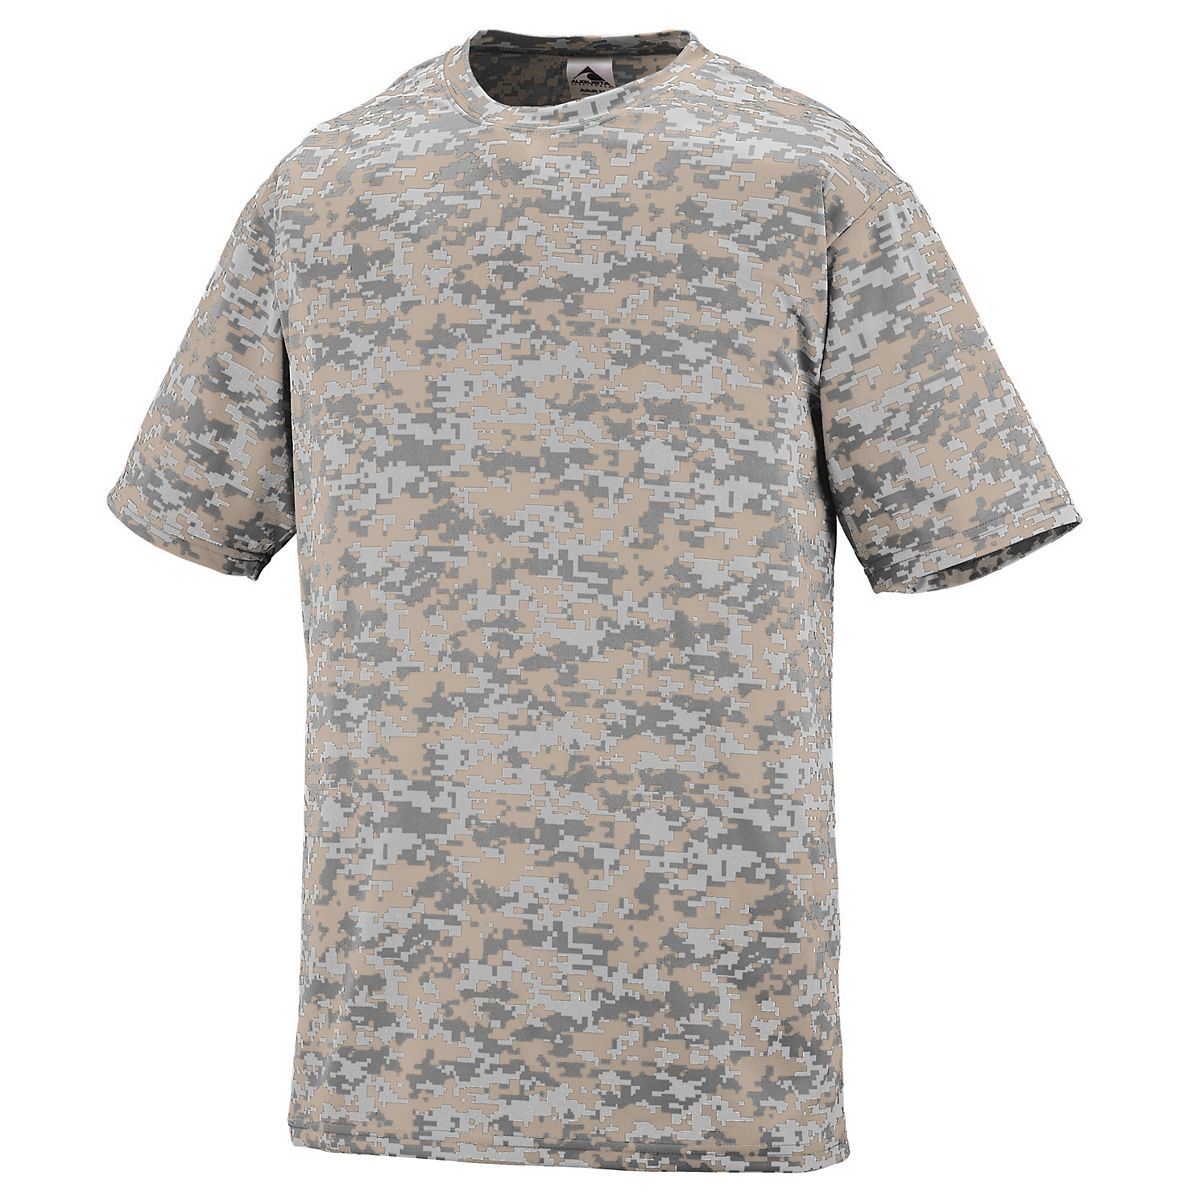 Augusta Sportswear Youth Digi Camo Wicking T-Shirt in Sand Digi  -Part of the Youth, Youth-Tee-Shirt, T-Shirts, Augusta-Products, Shirts product lines at KanaleyCreations.com